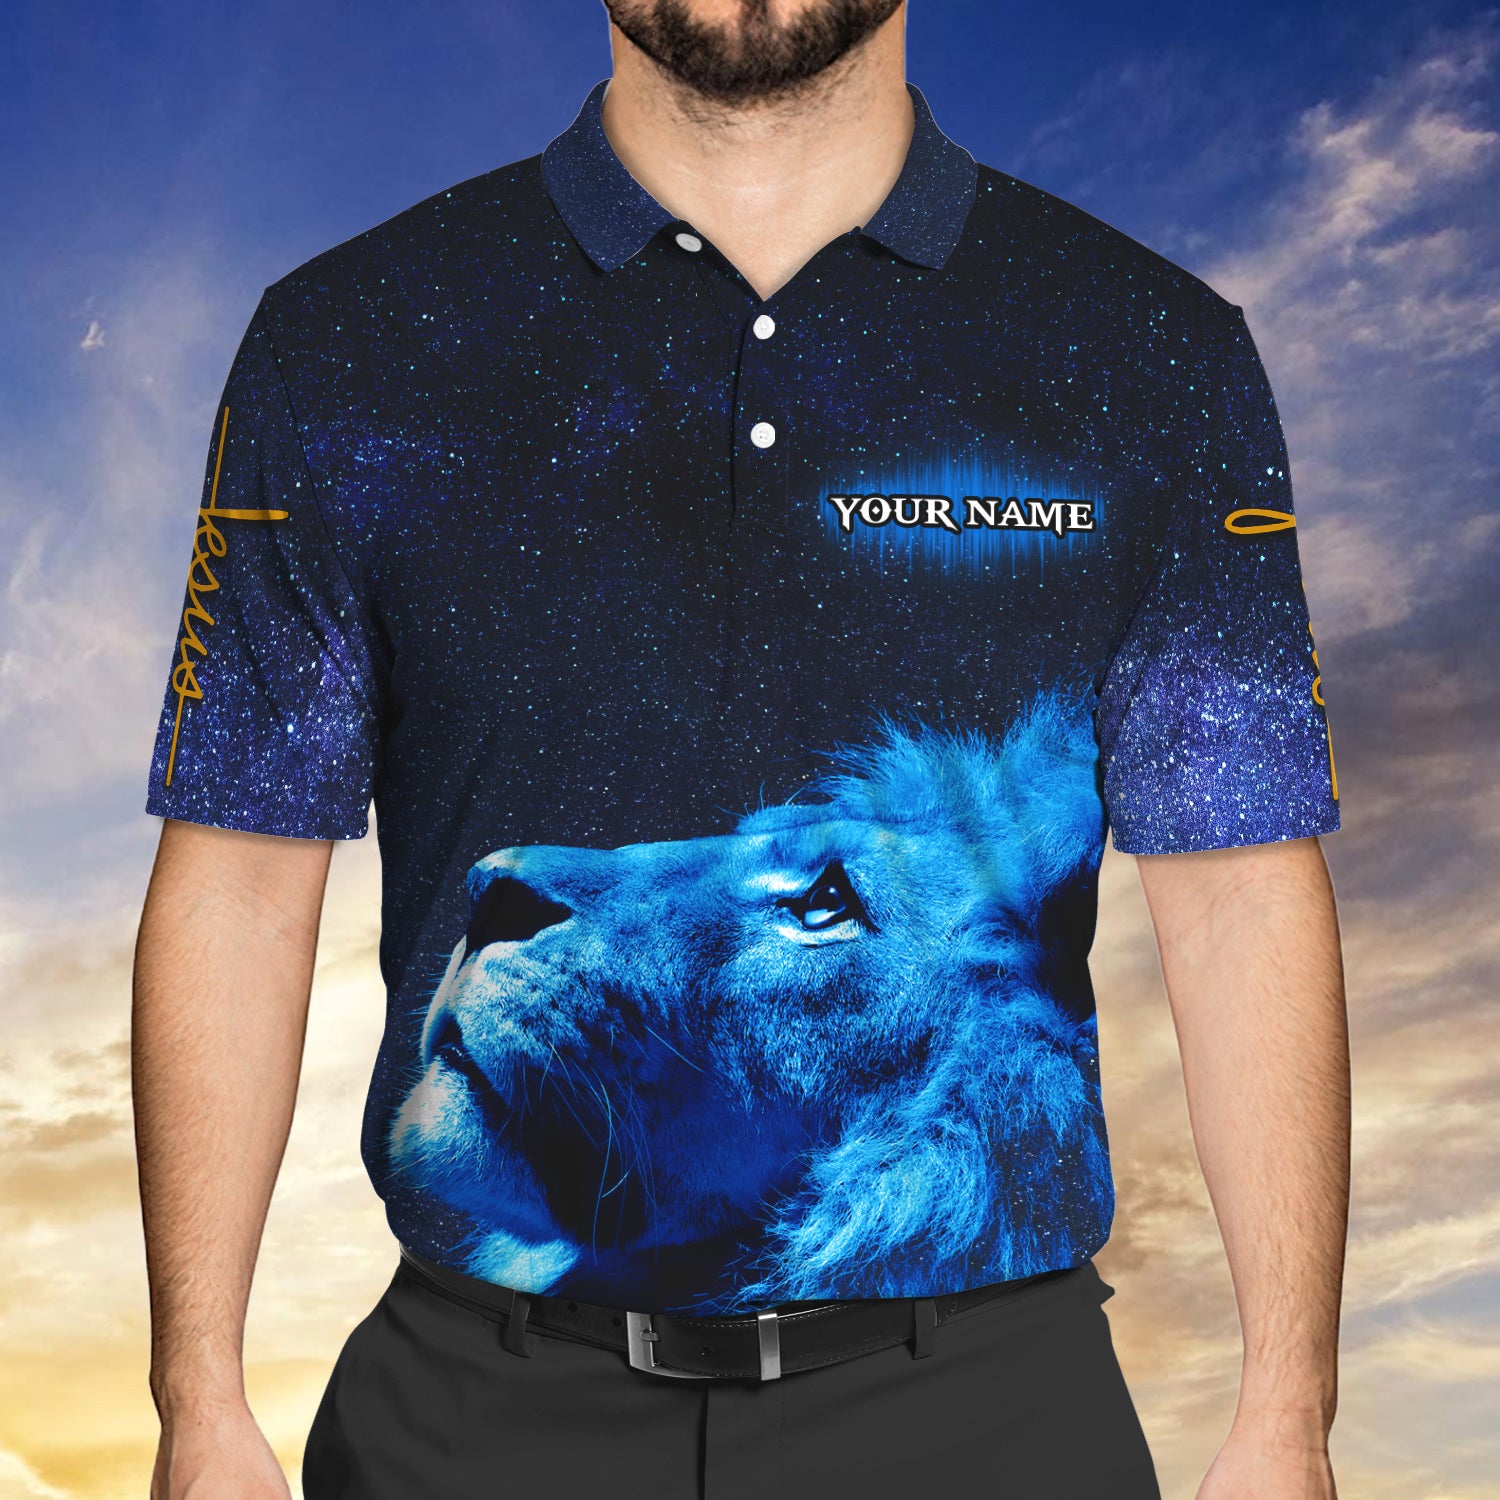 In God We Trust - Personalized Name 3D Polo Shirt 01 - CV98